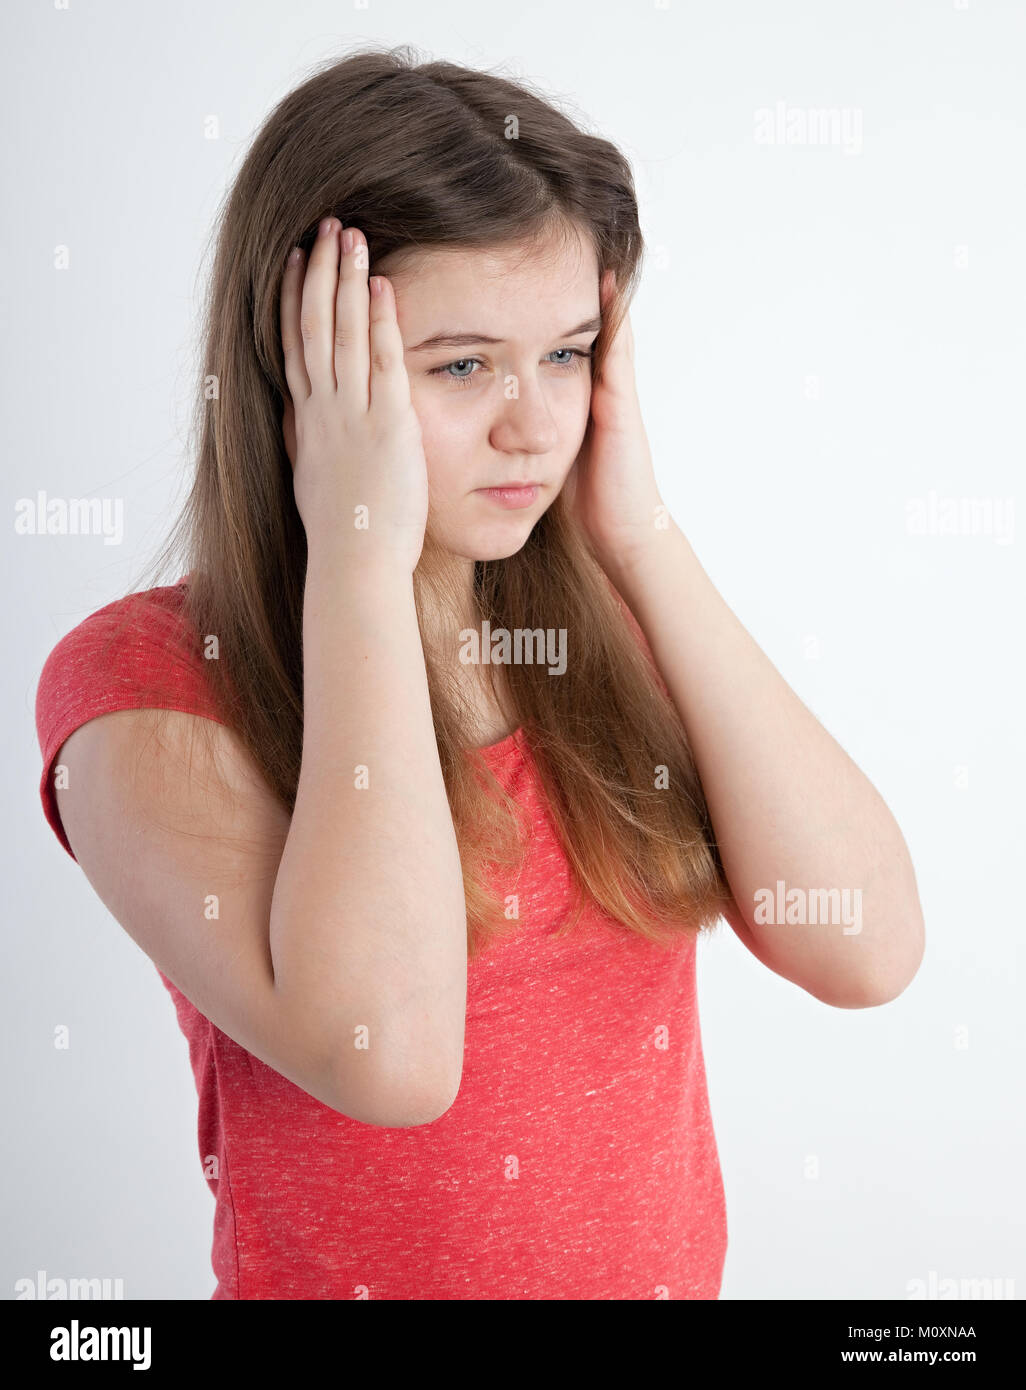 girl closing her ears with hands Stock Photo